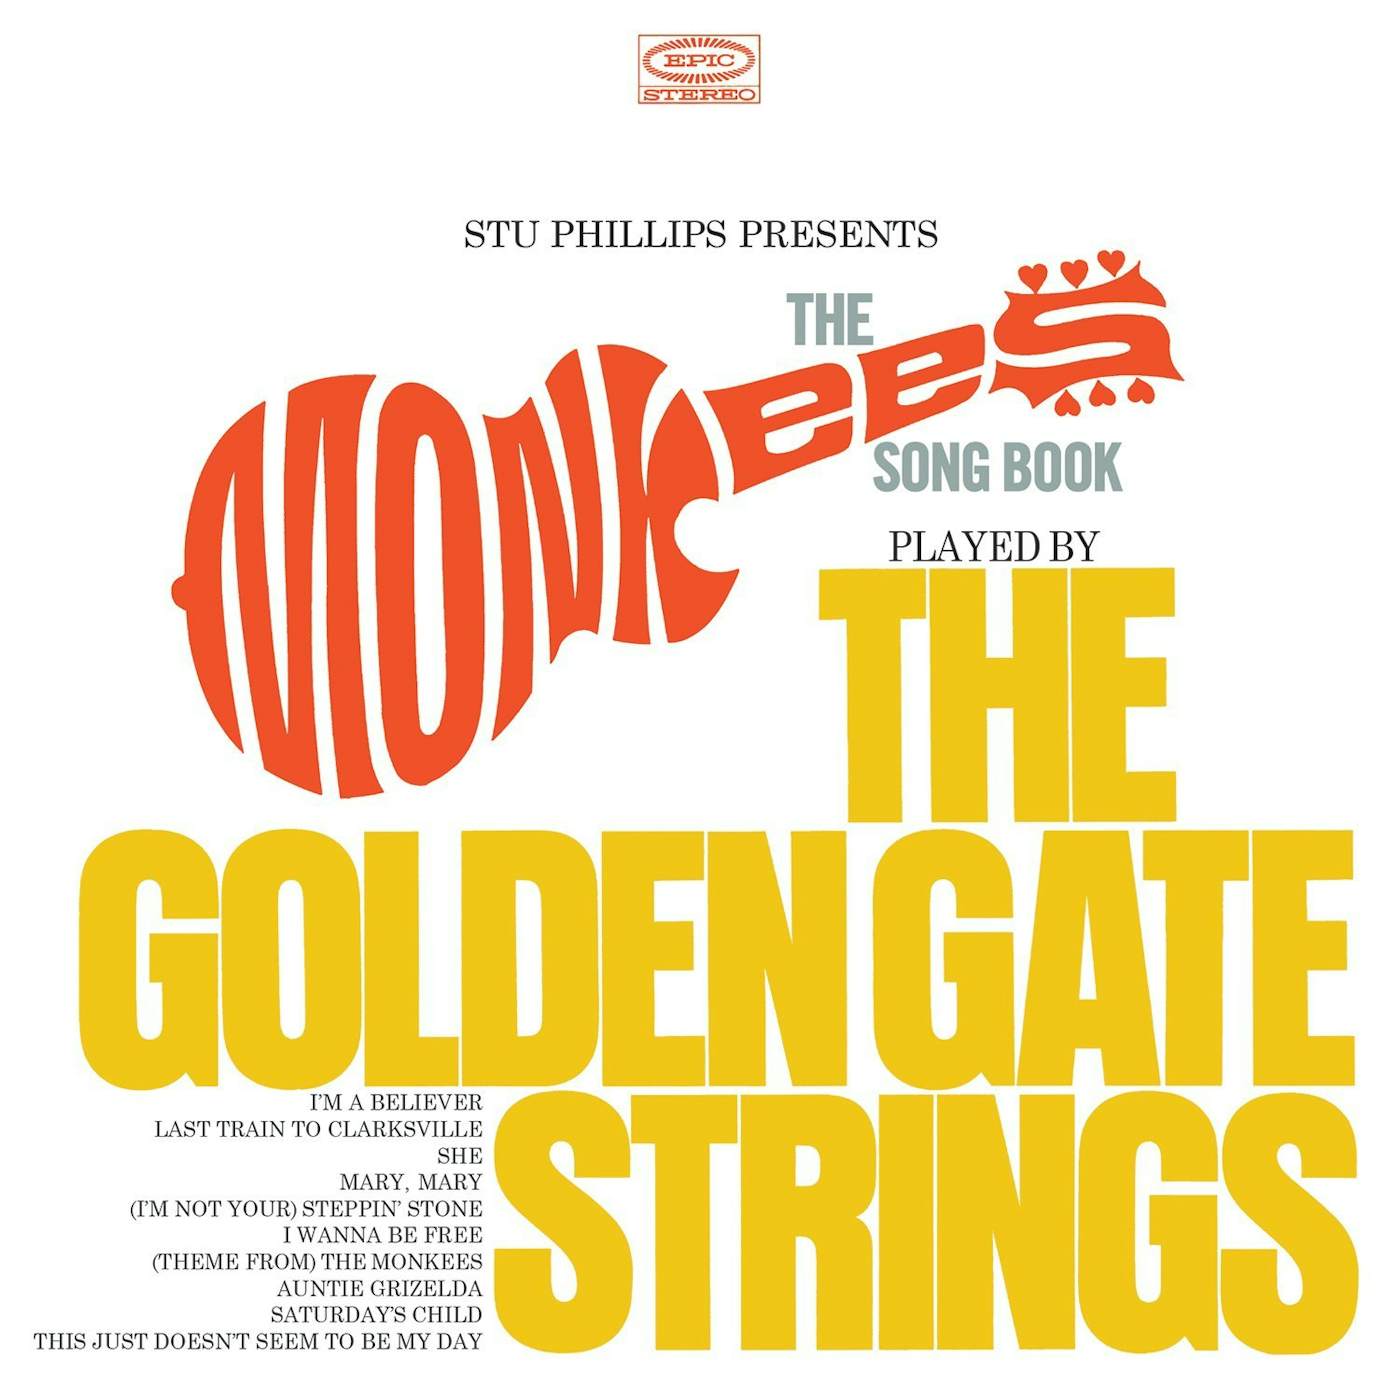 STU PHILLIPS PRESENTS: THE MONKEES SONGBOOK PLAYED CD